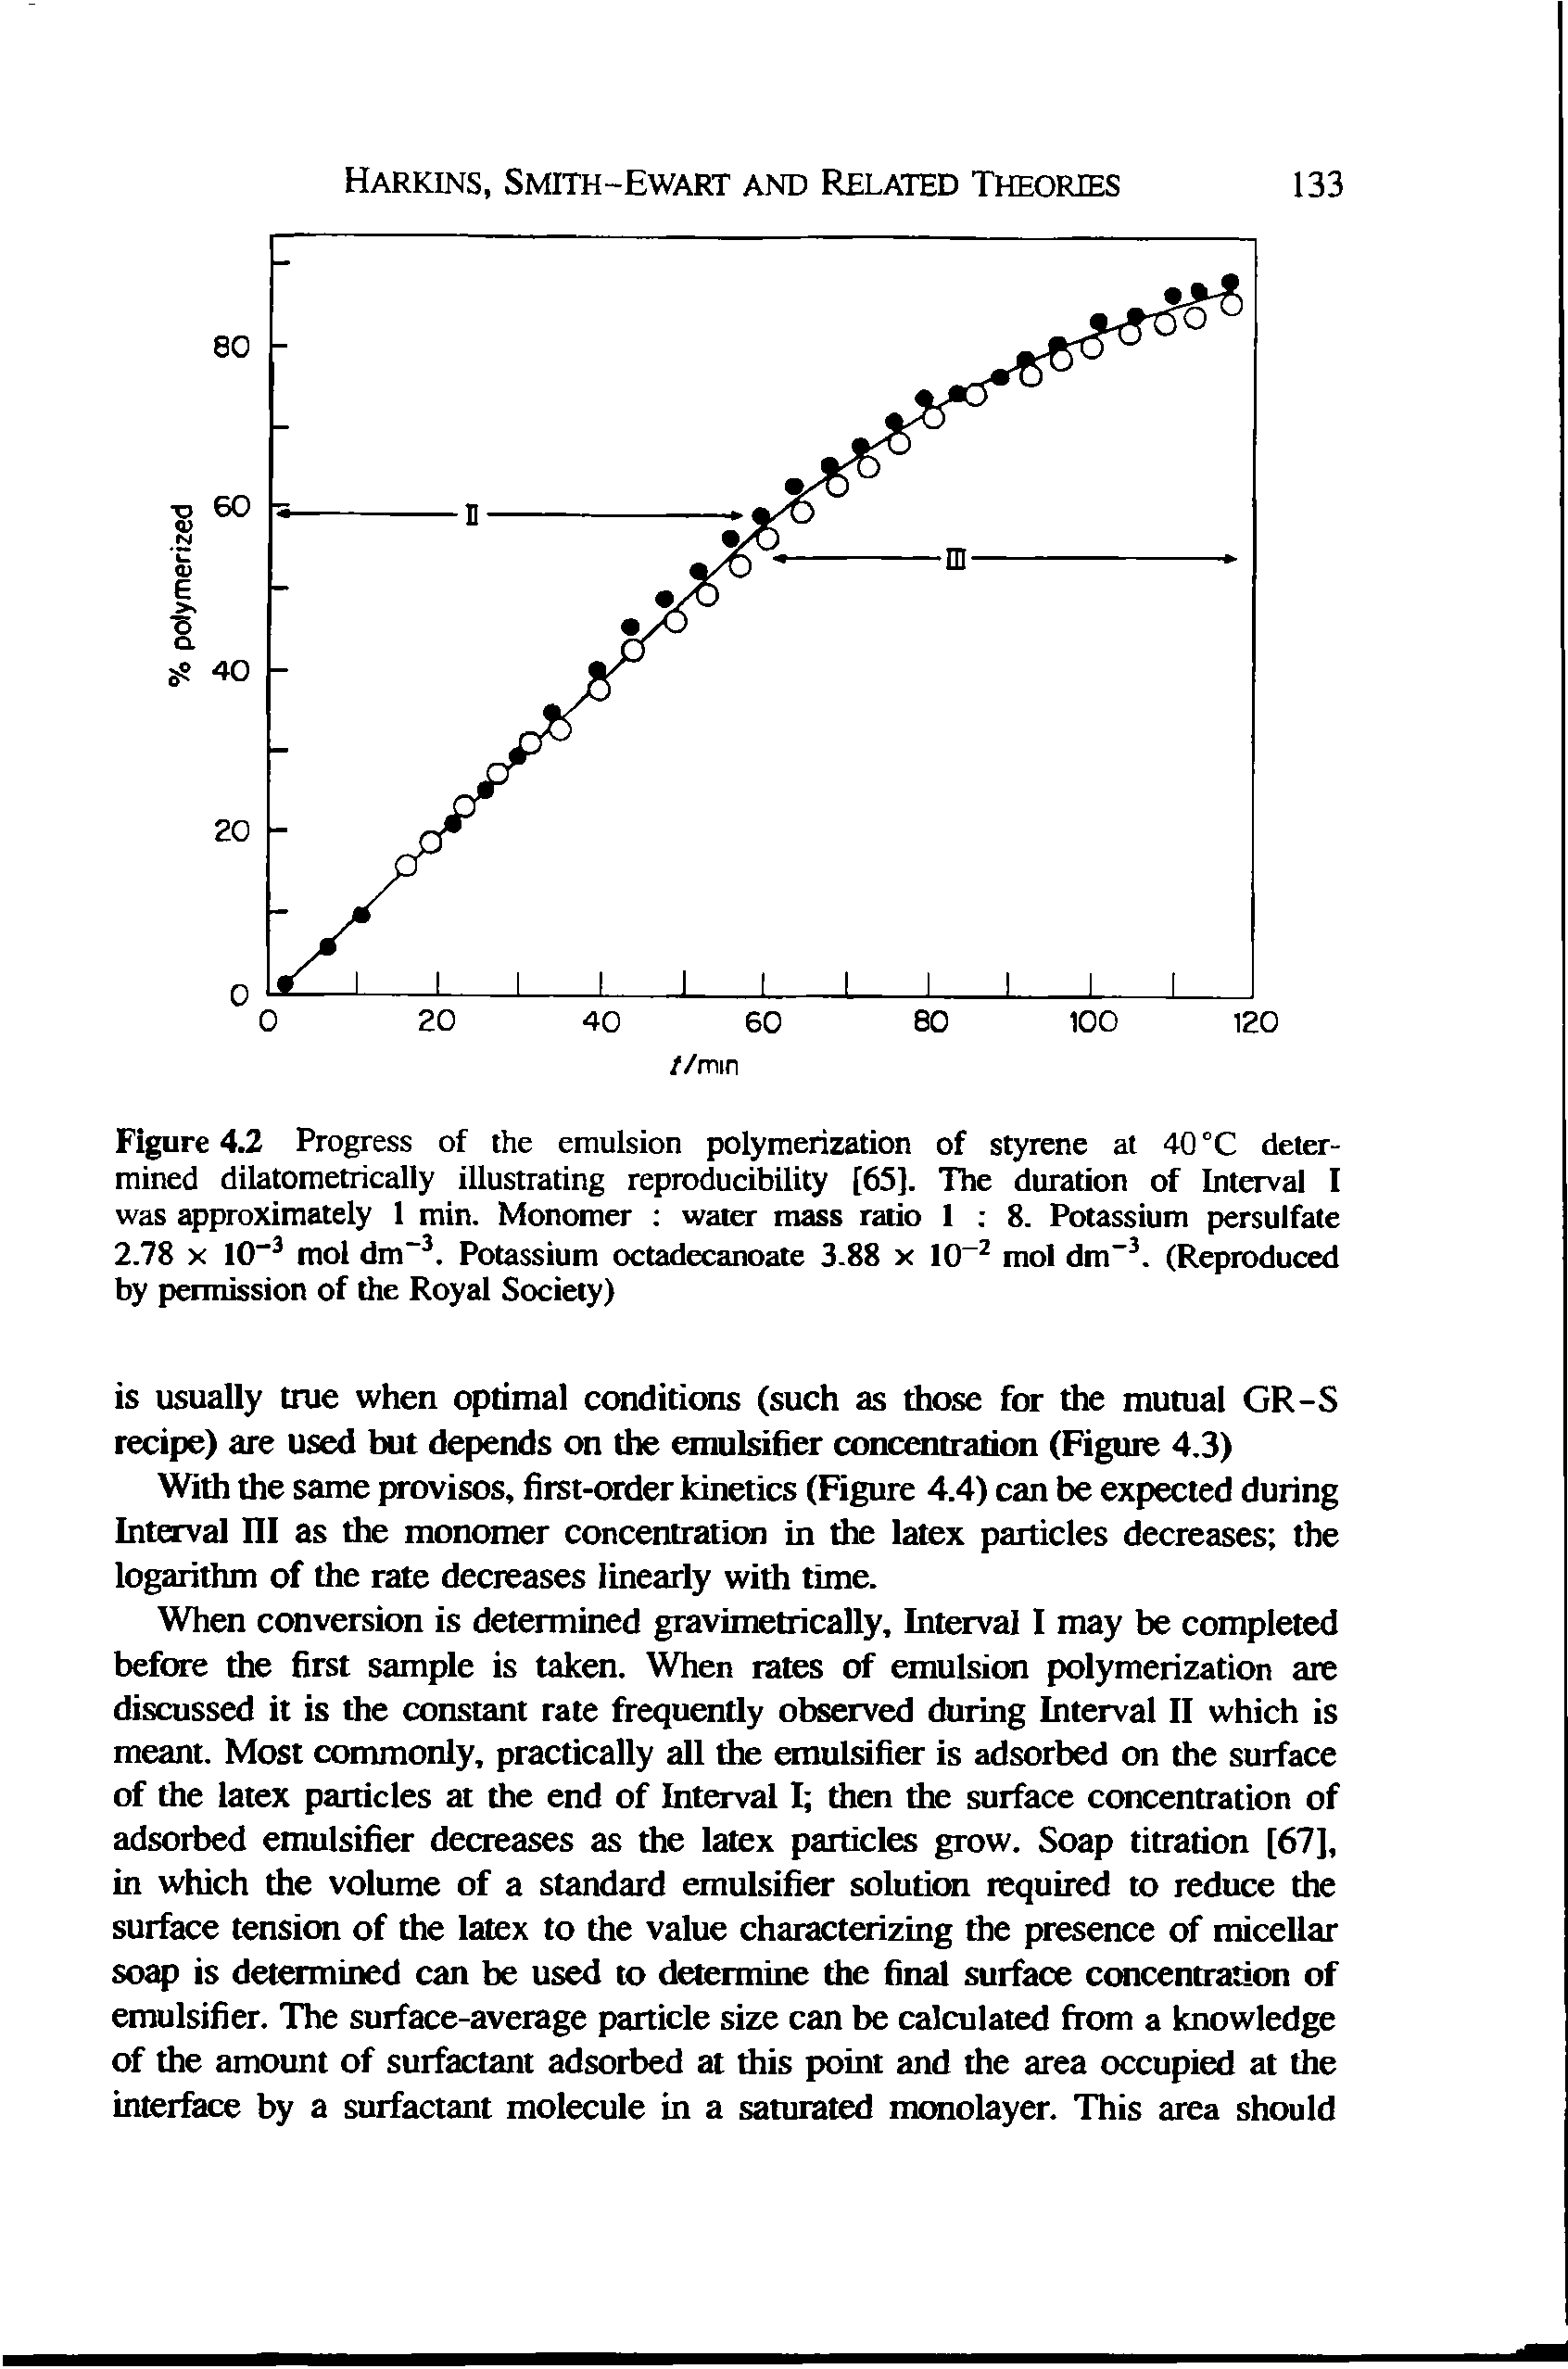 Figure 4.2 Progress of the emulsion polymerization of styrene at 40 °C determined dilatometrically illustrating reproducibility [63]. The duration of Interval I was approximately 1 min. Monomer water mass ratio 1 8. Potassium persulfate 2.78 X 10" mol dm. Potassium octadecanoate 3.88 x 10 mol dm . (Reproduced by permission of the Royal Society)...